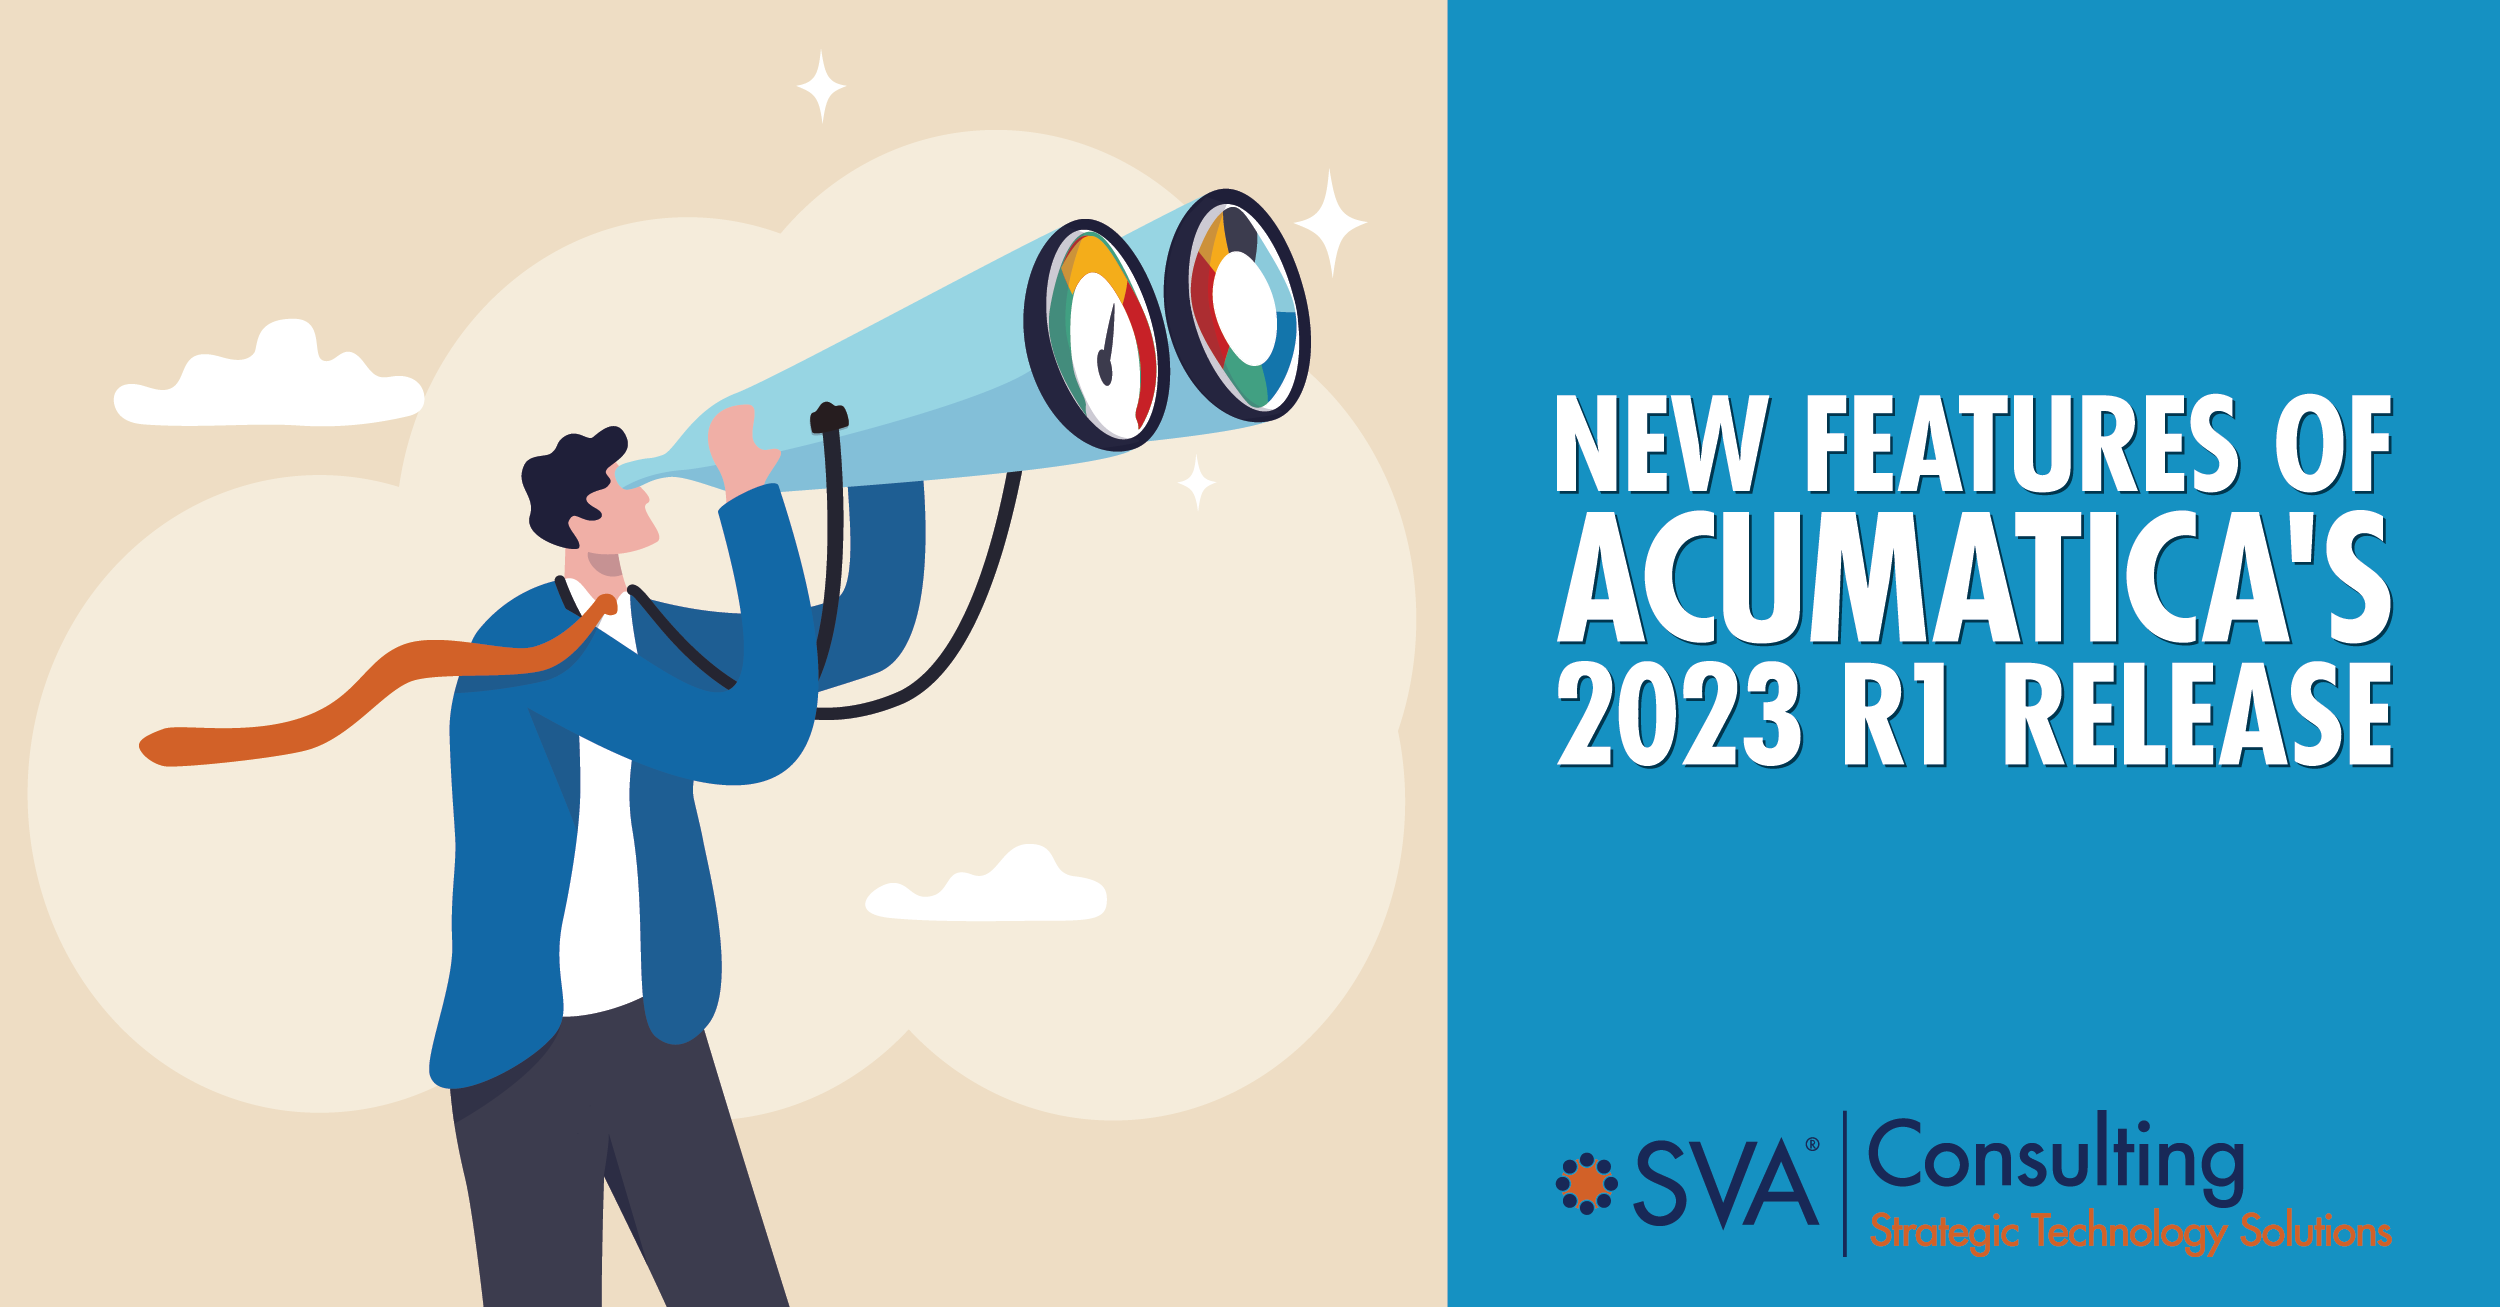 New Features of Acumatica's 2023 R1 Release